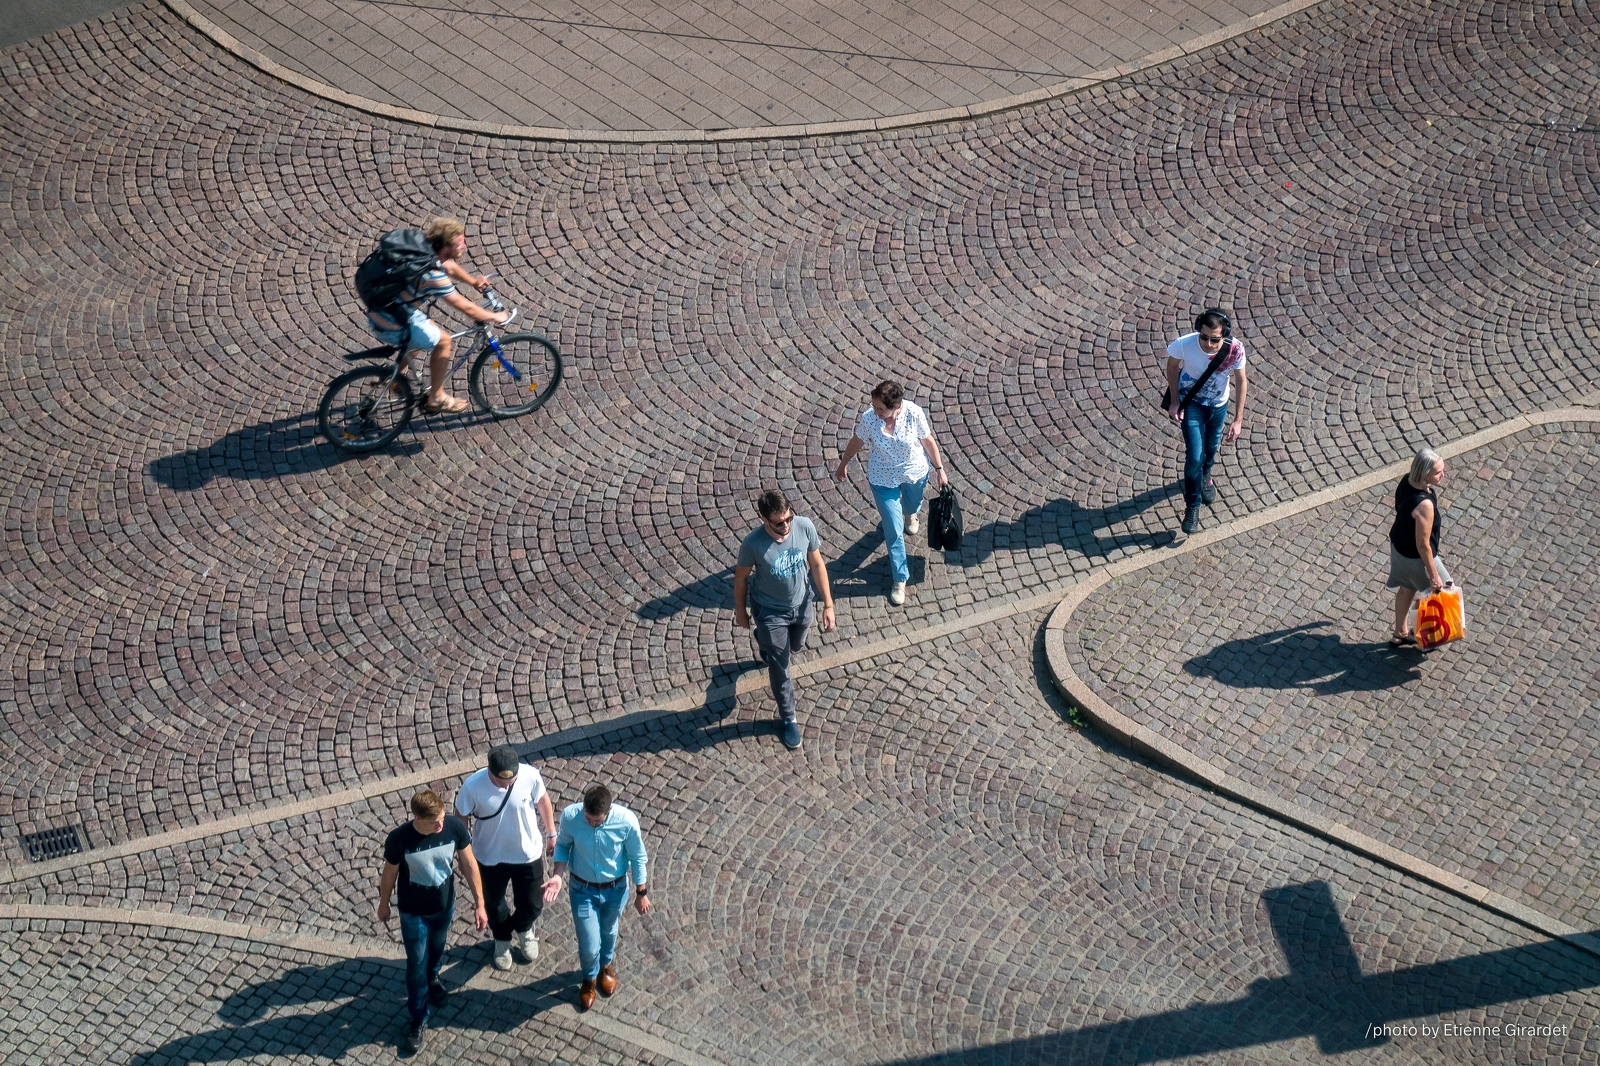 201908_26_RXX07096-street-people-from-above-leipzig-by-E-Girardet.jpg